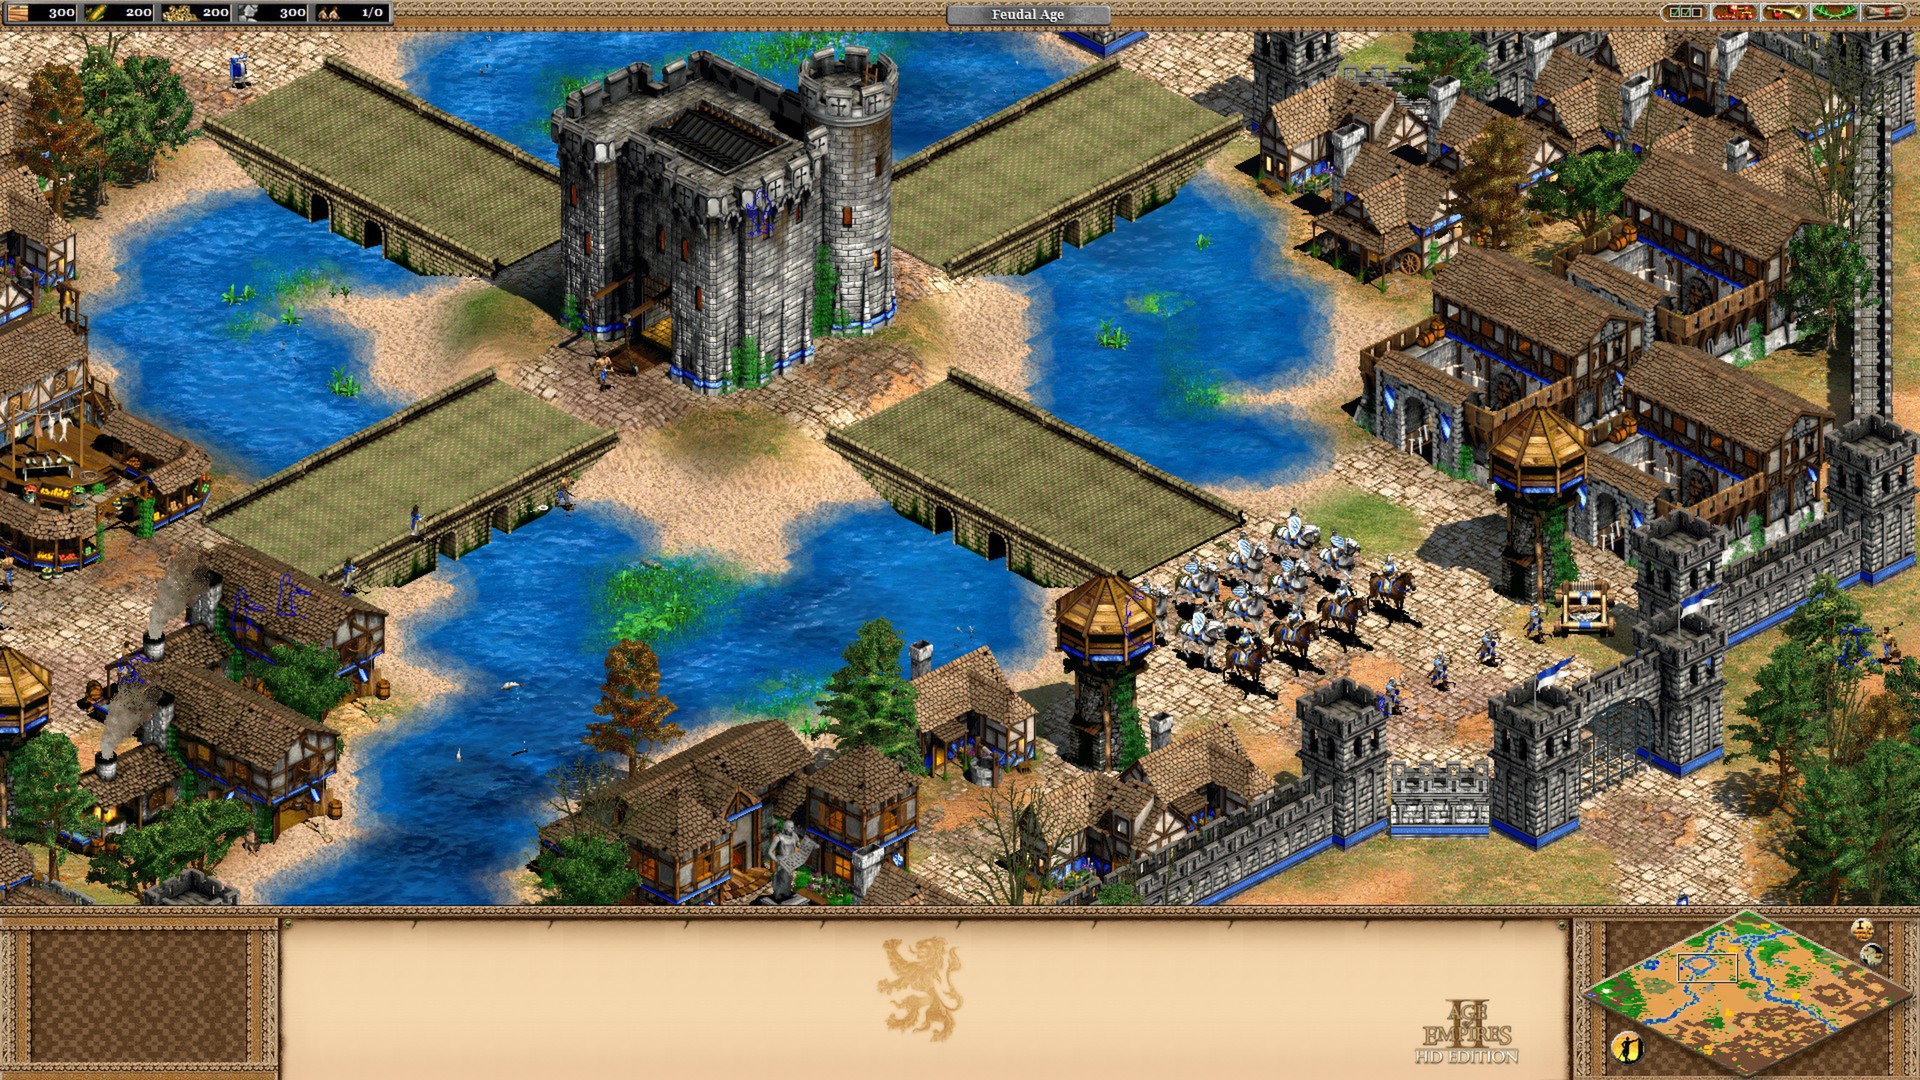 Age of Empires II (2013) on Steam